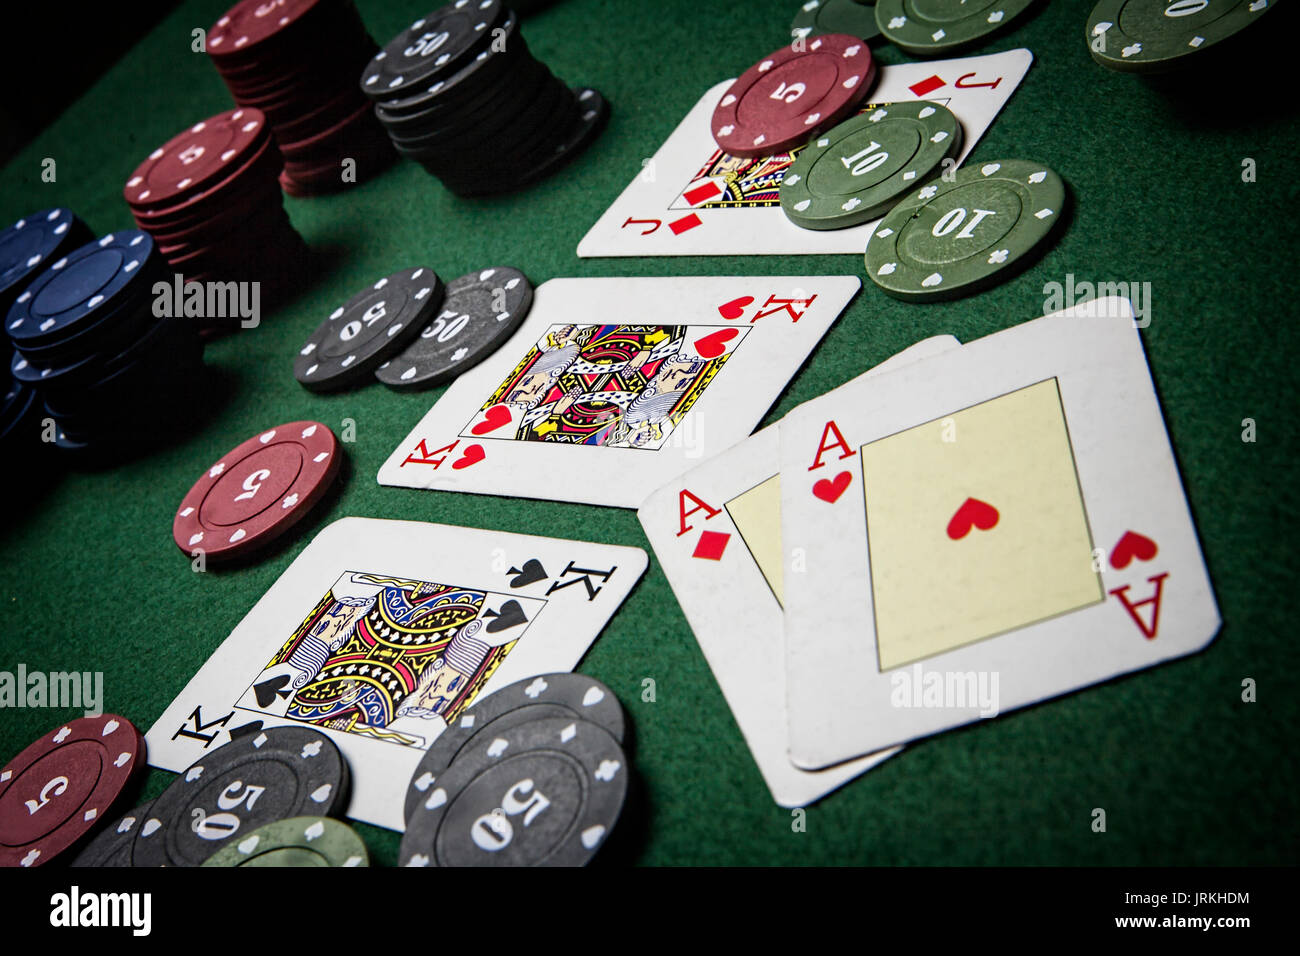 cards poker deck English, Poker game interesting with a possible winning combination on green background Stock Photo